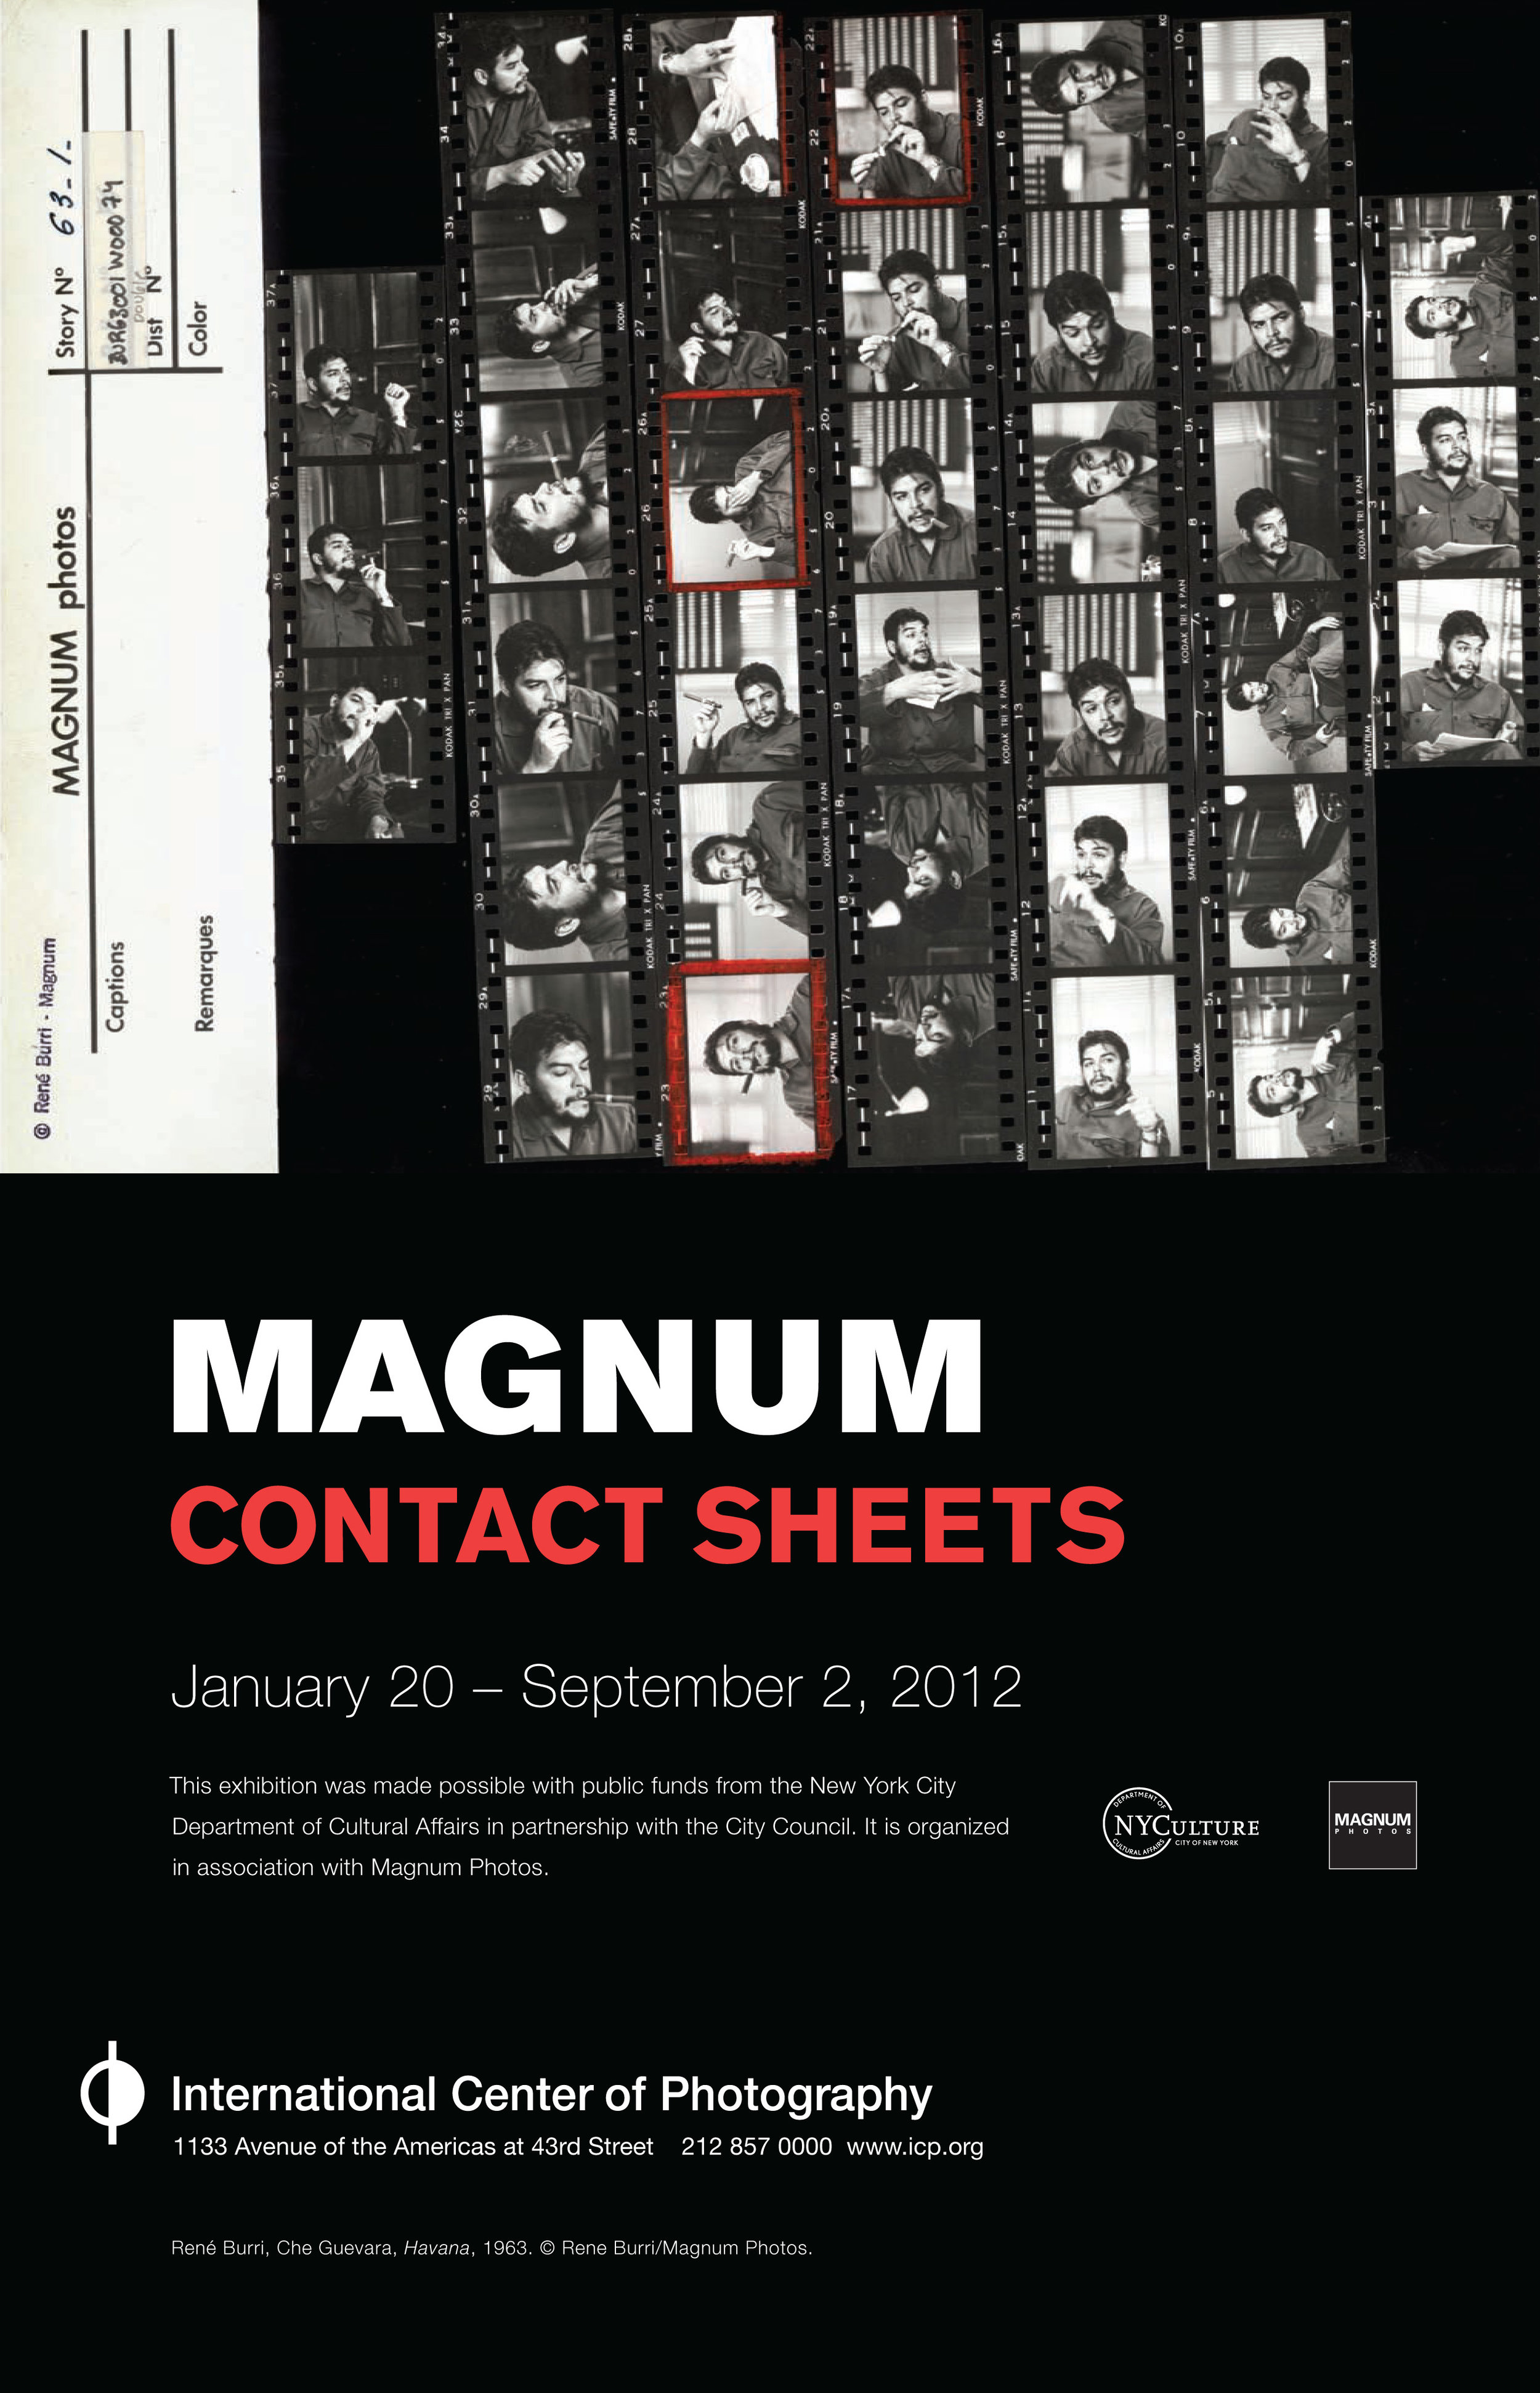 ICP New York (Magnum contact sheets)